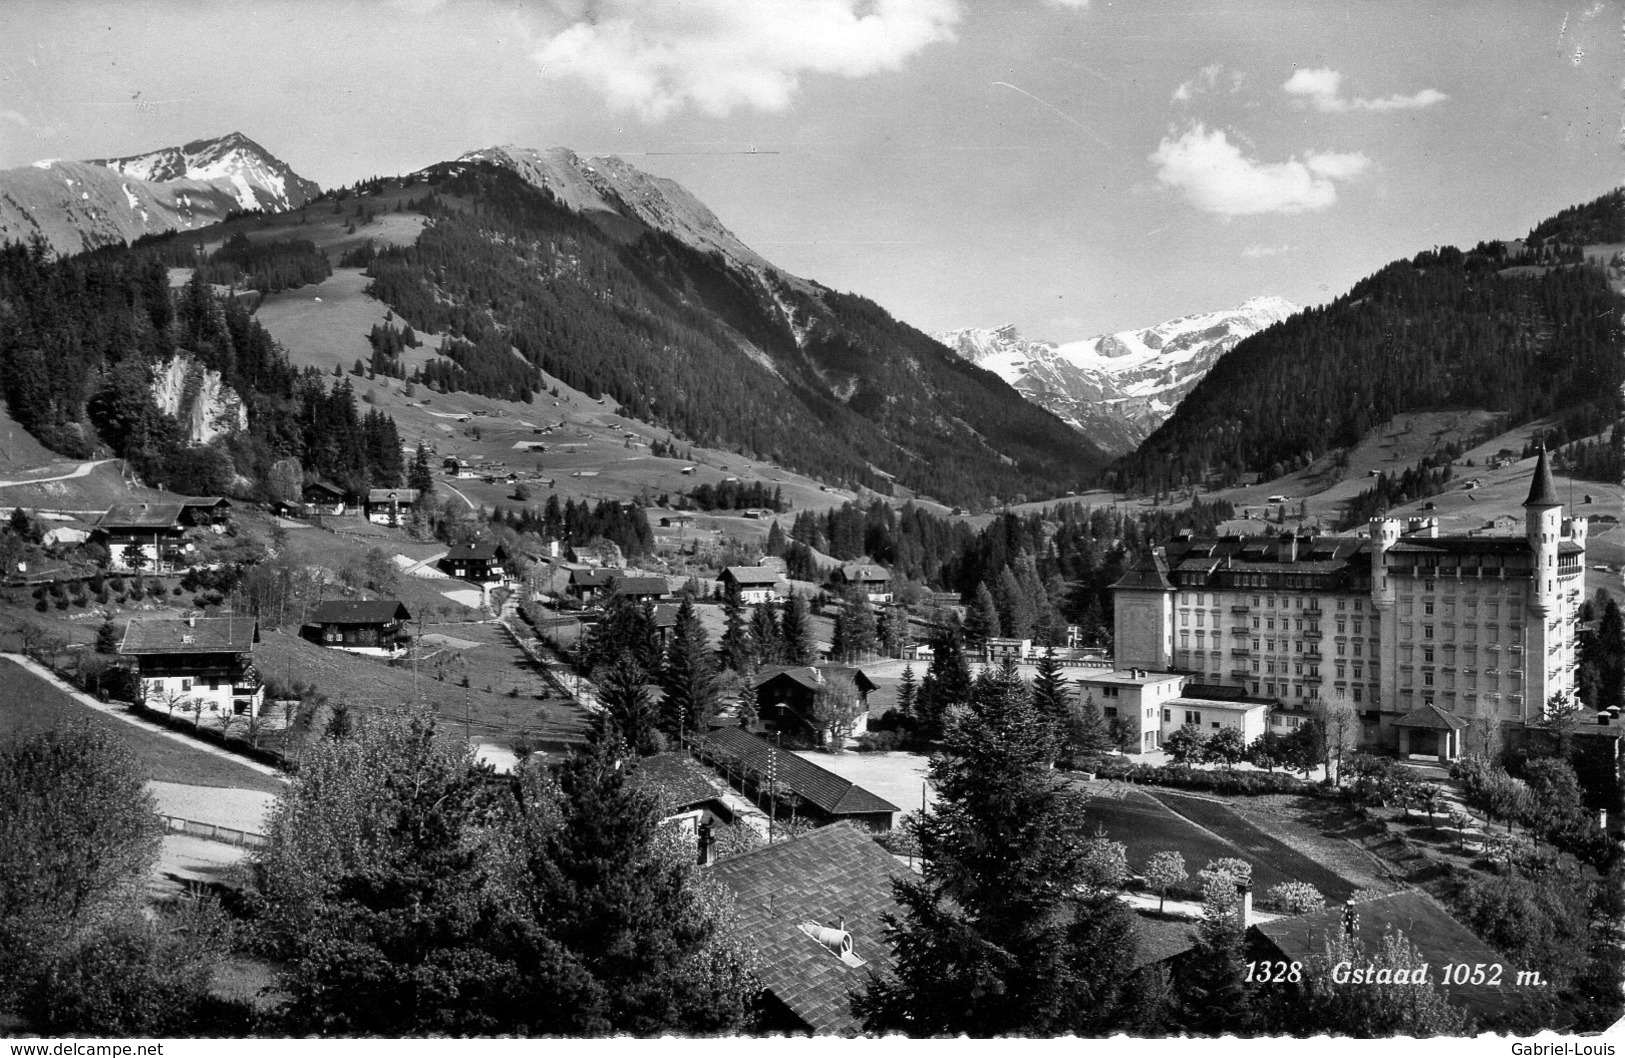 Gstaad - Gstaad